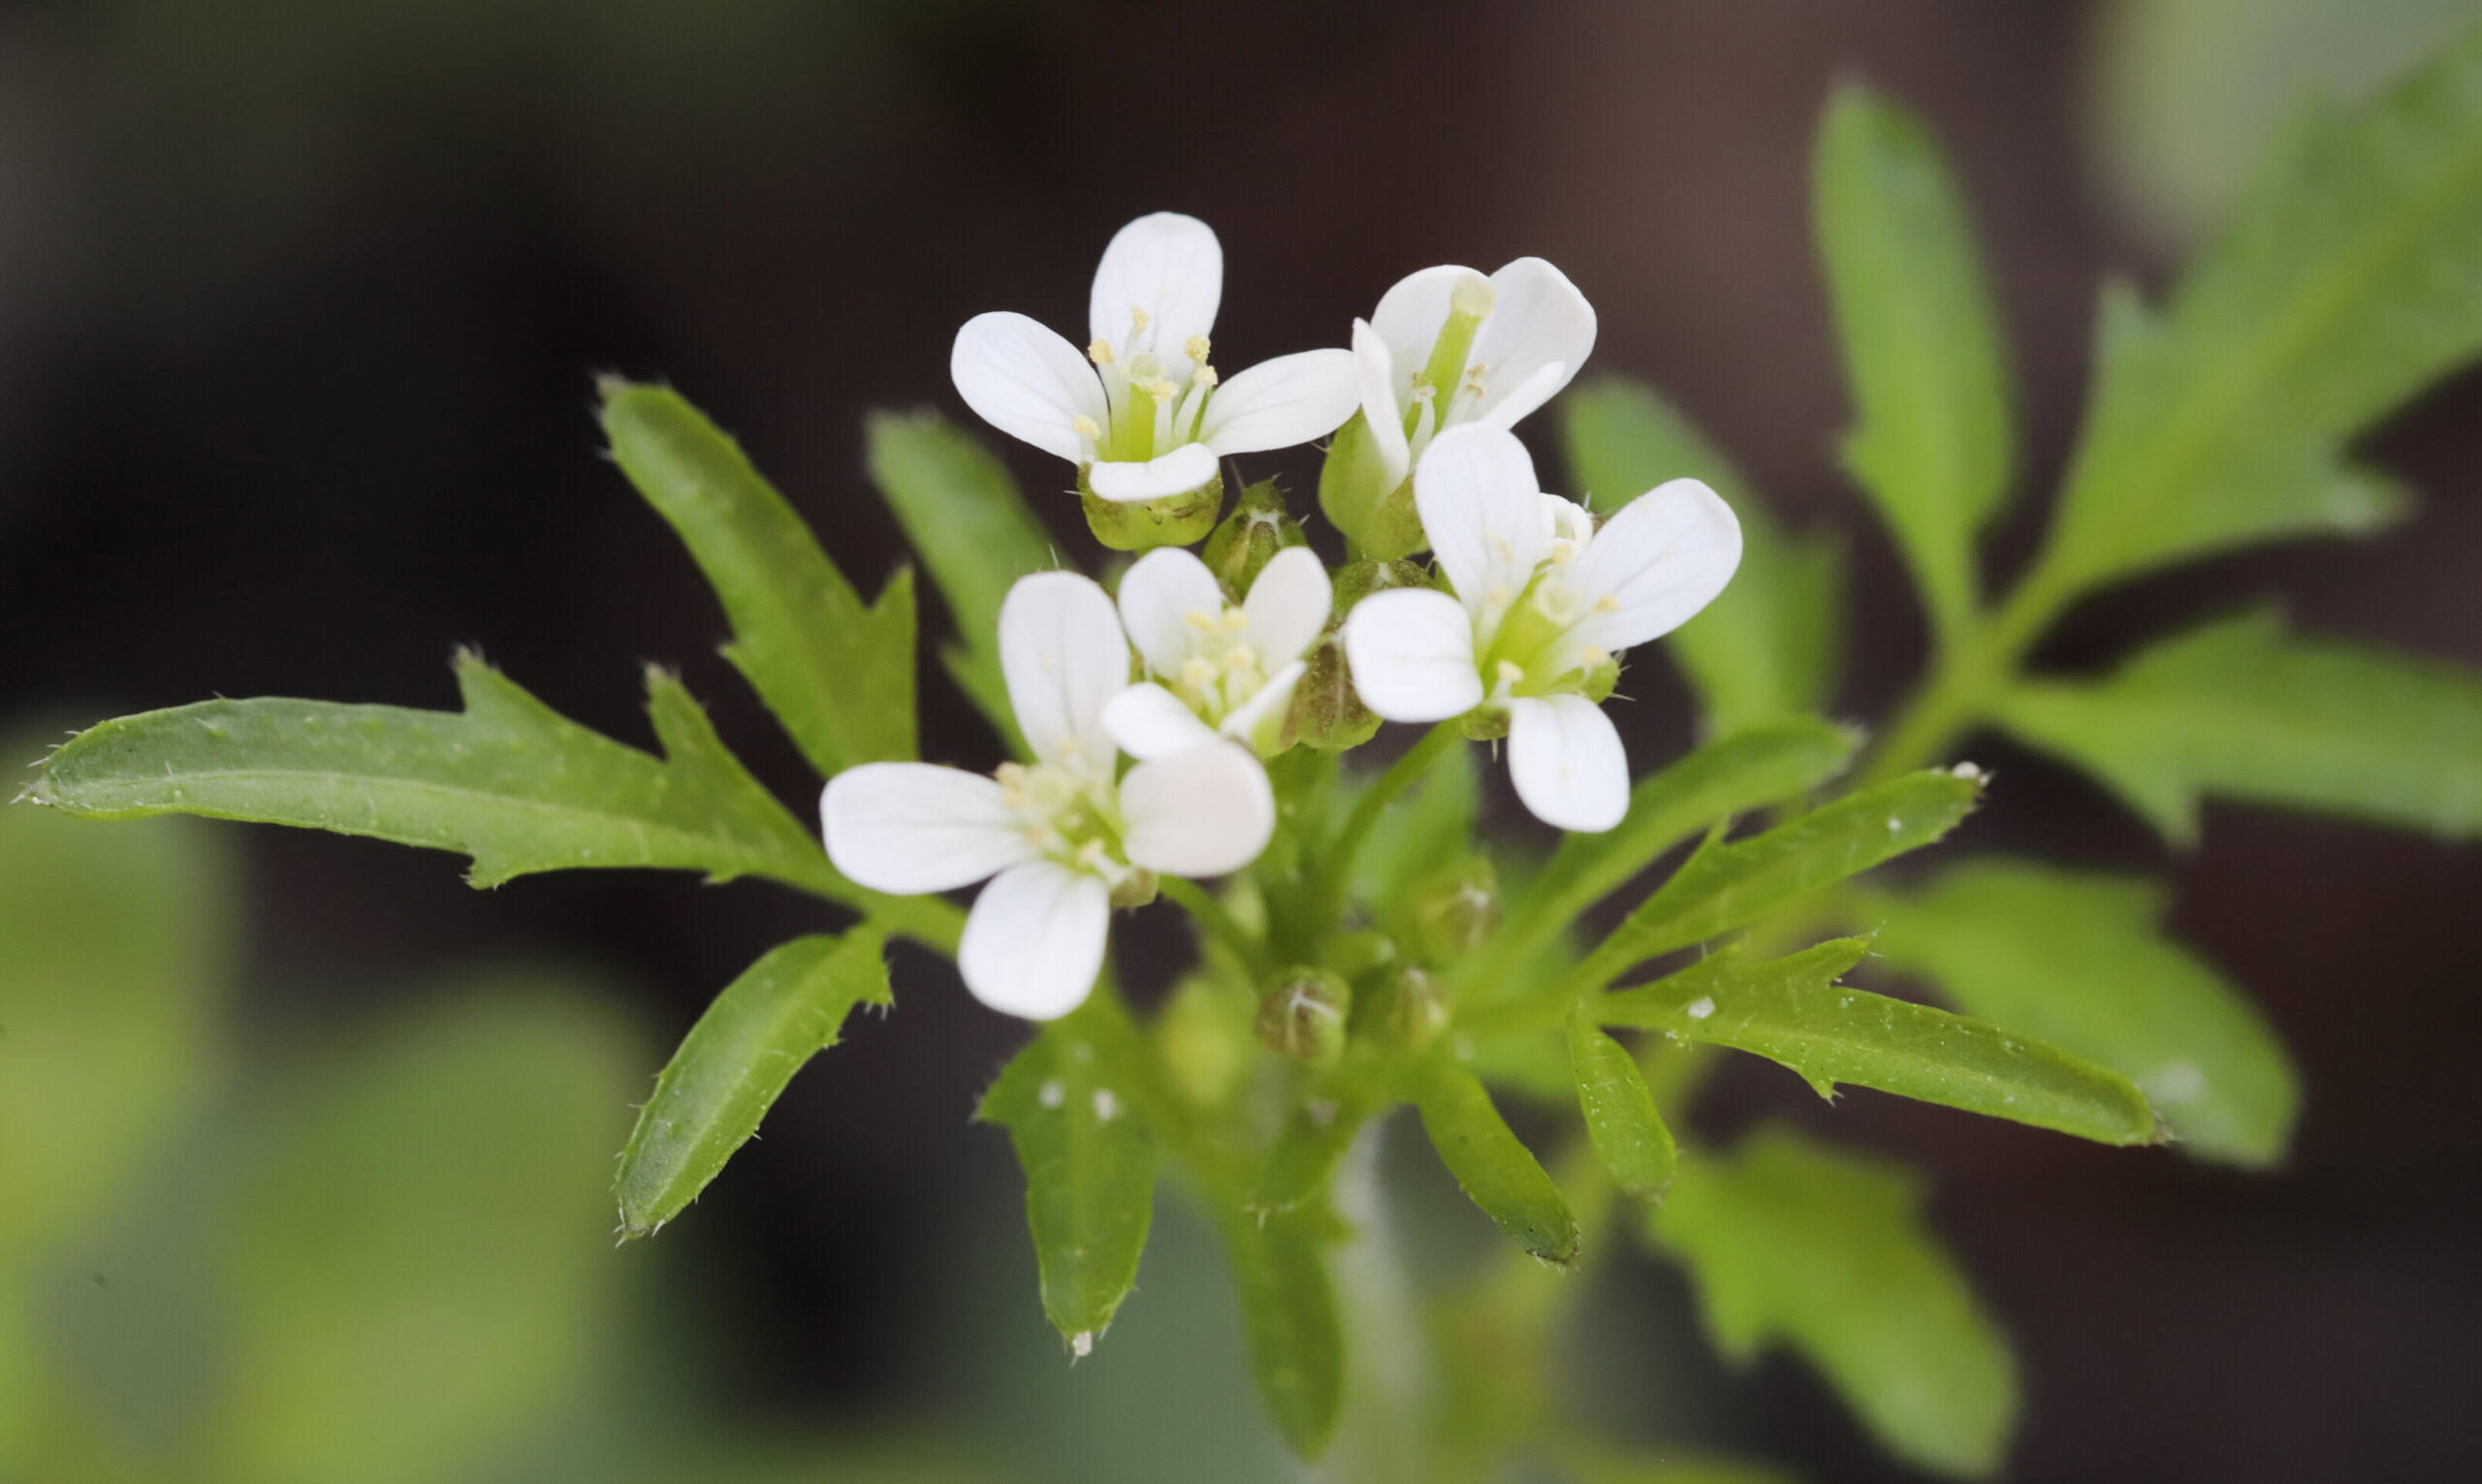 These plants produce their own "aspirin": an important discovery that could inspire us